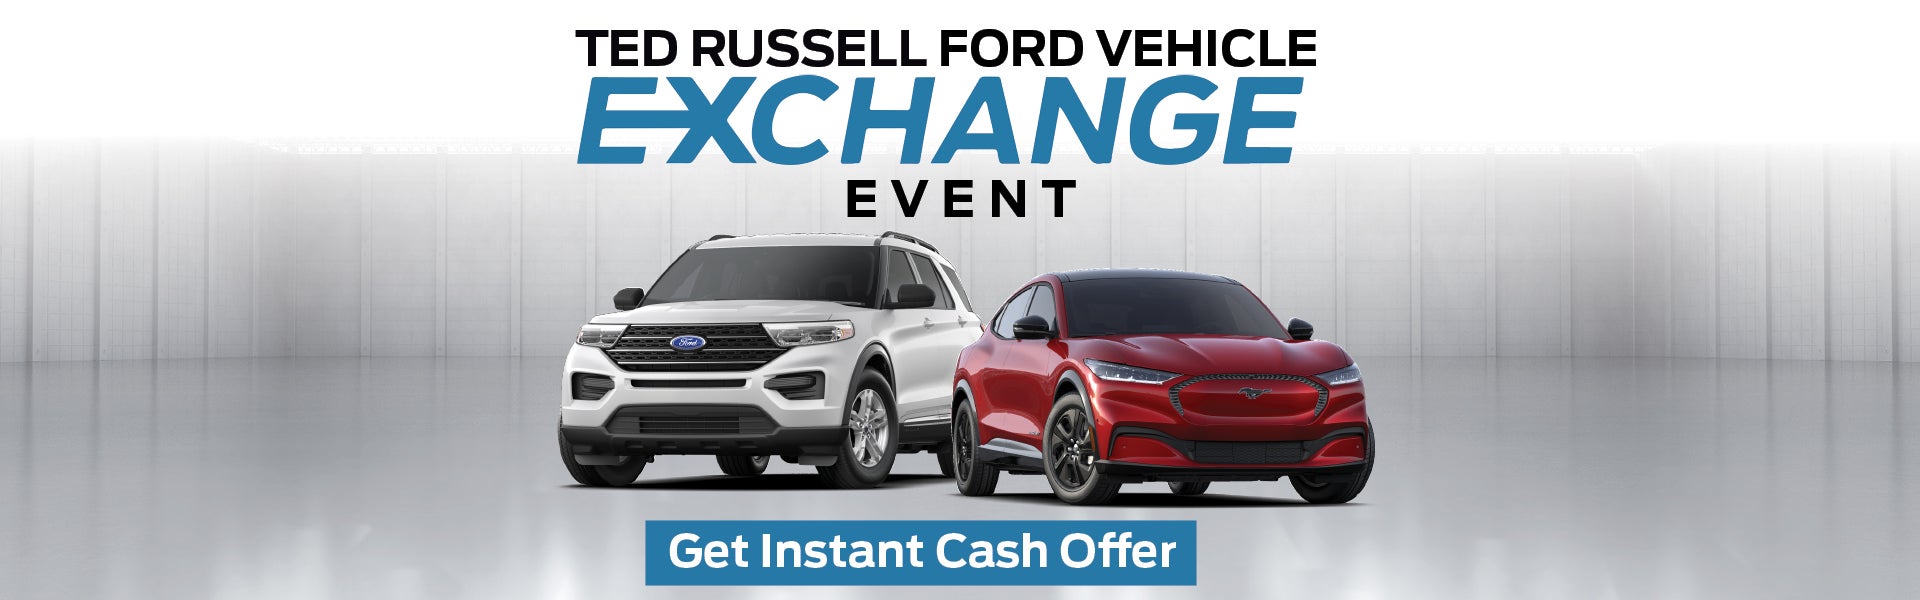 Ted Russell Ford Vehicle Exchange Event